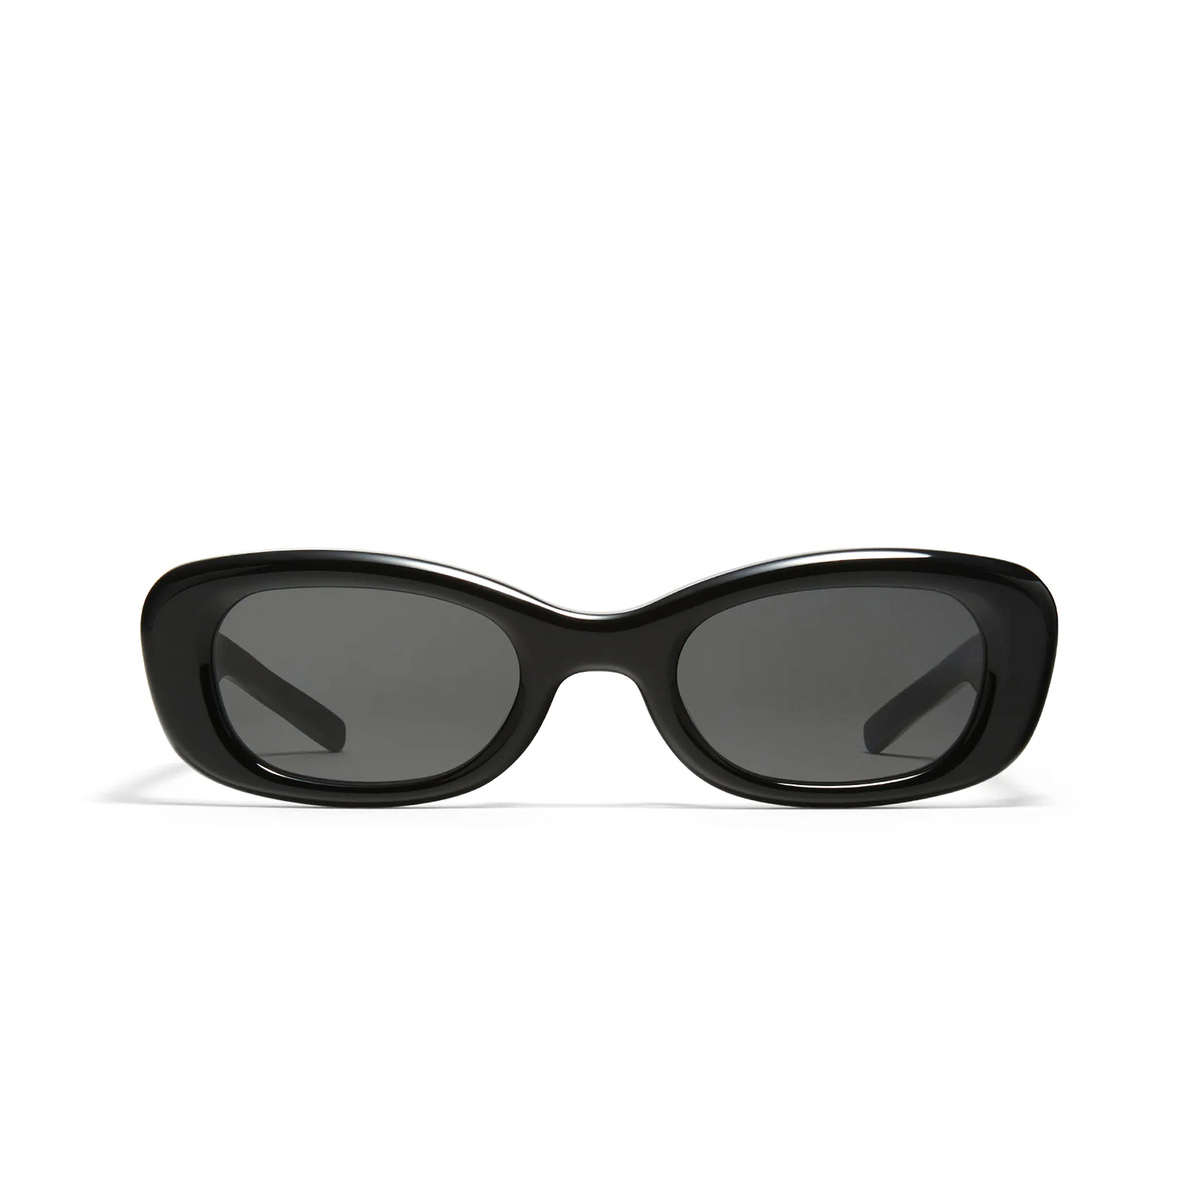 Gentle Monster ORACLE.S Sunglasses 01 Black - front view